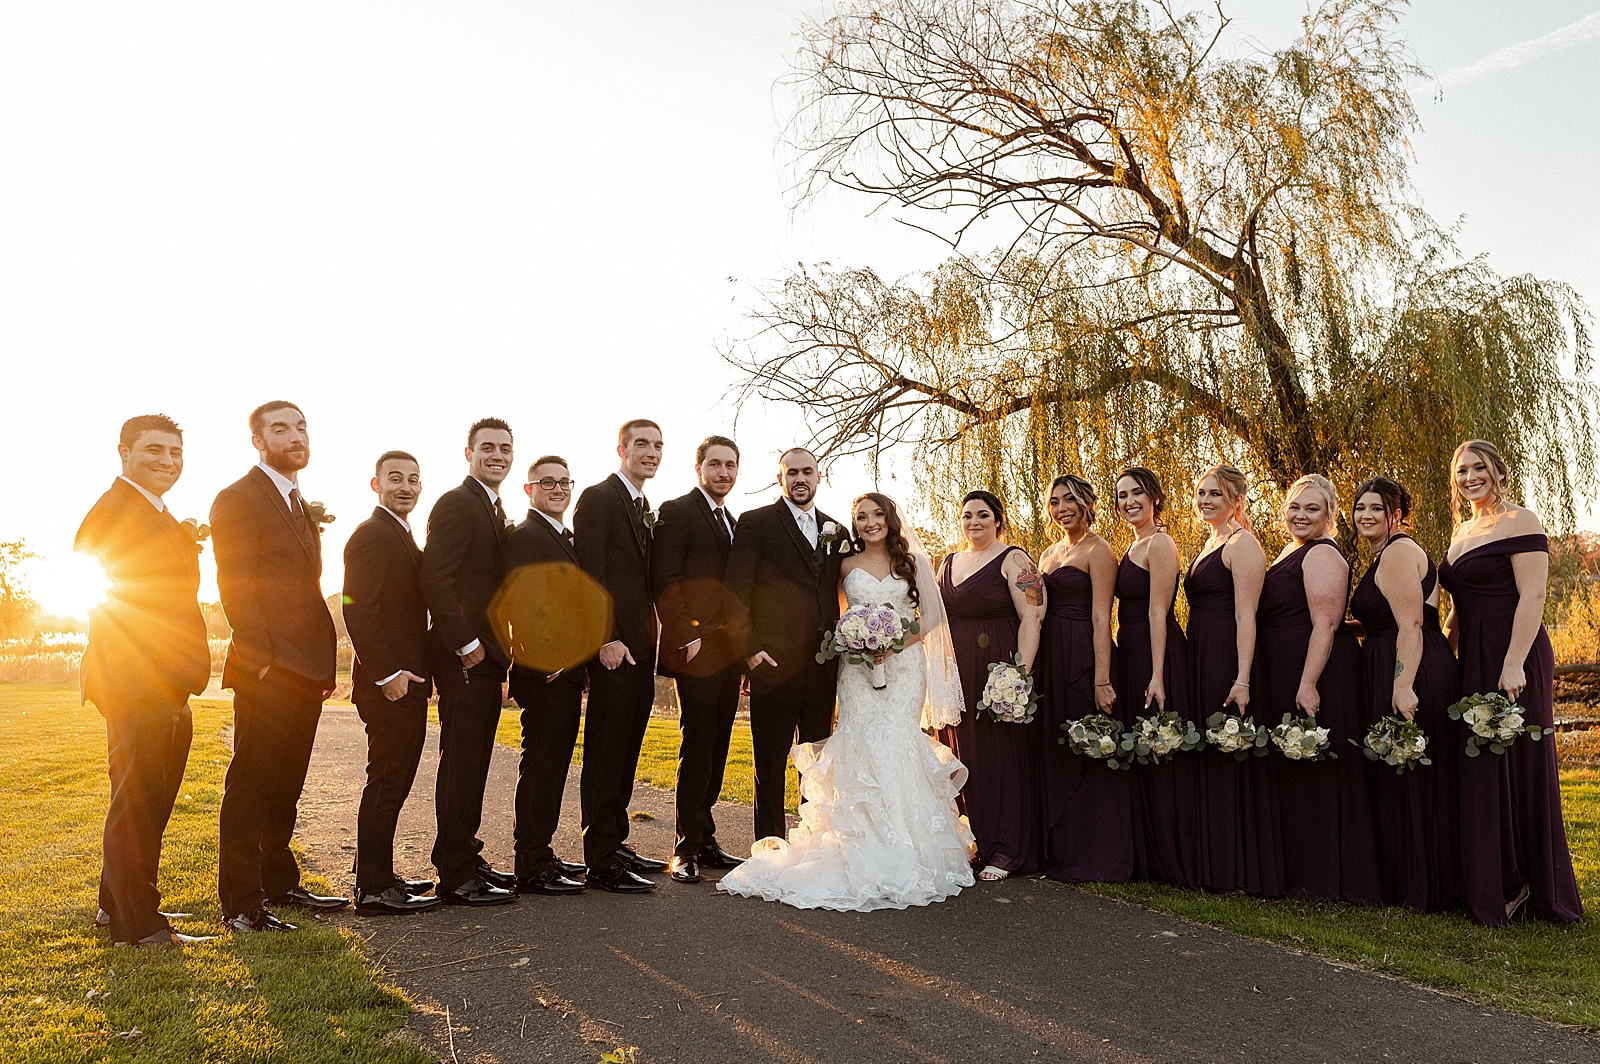 Formal portrait of Bride and Groom with entire wedding party